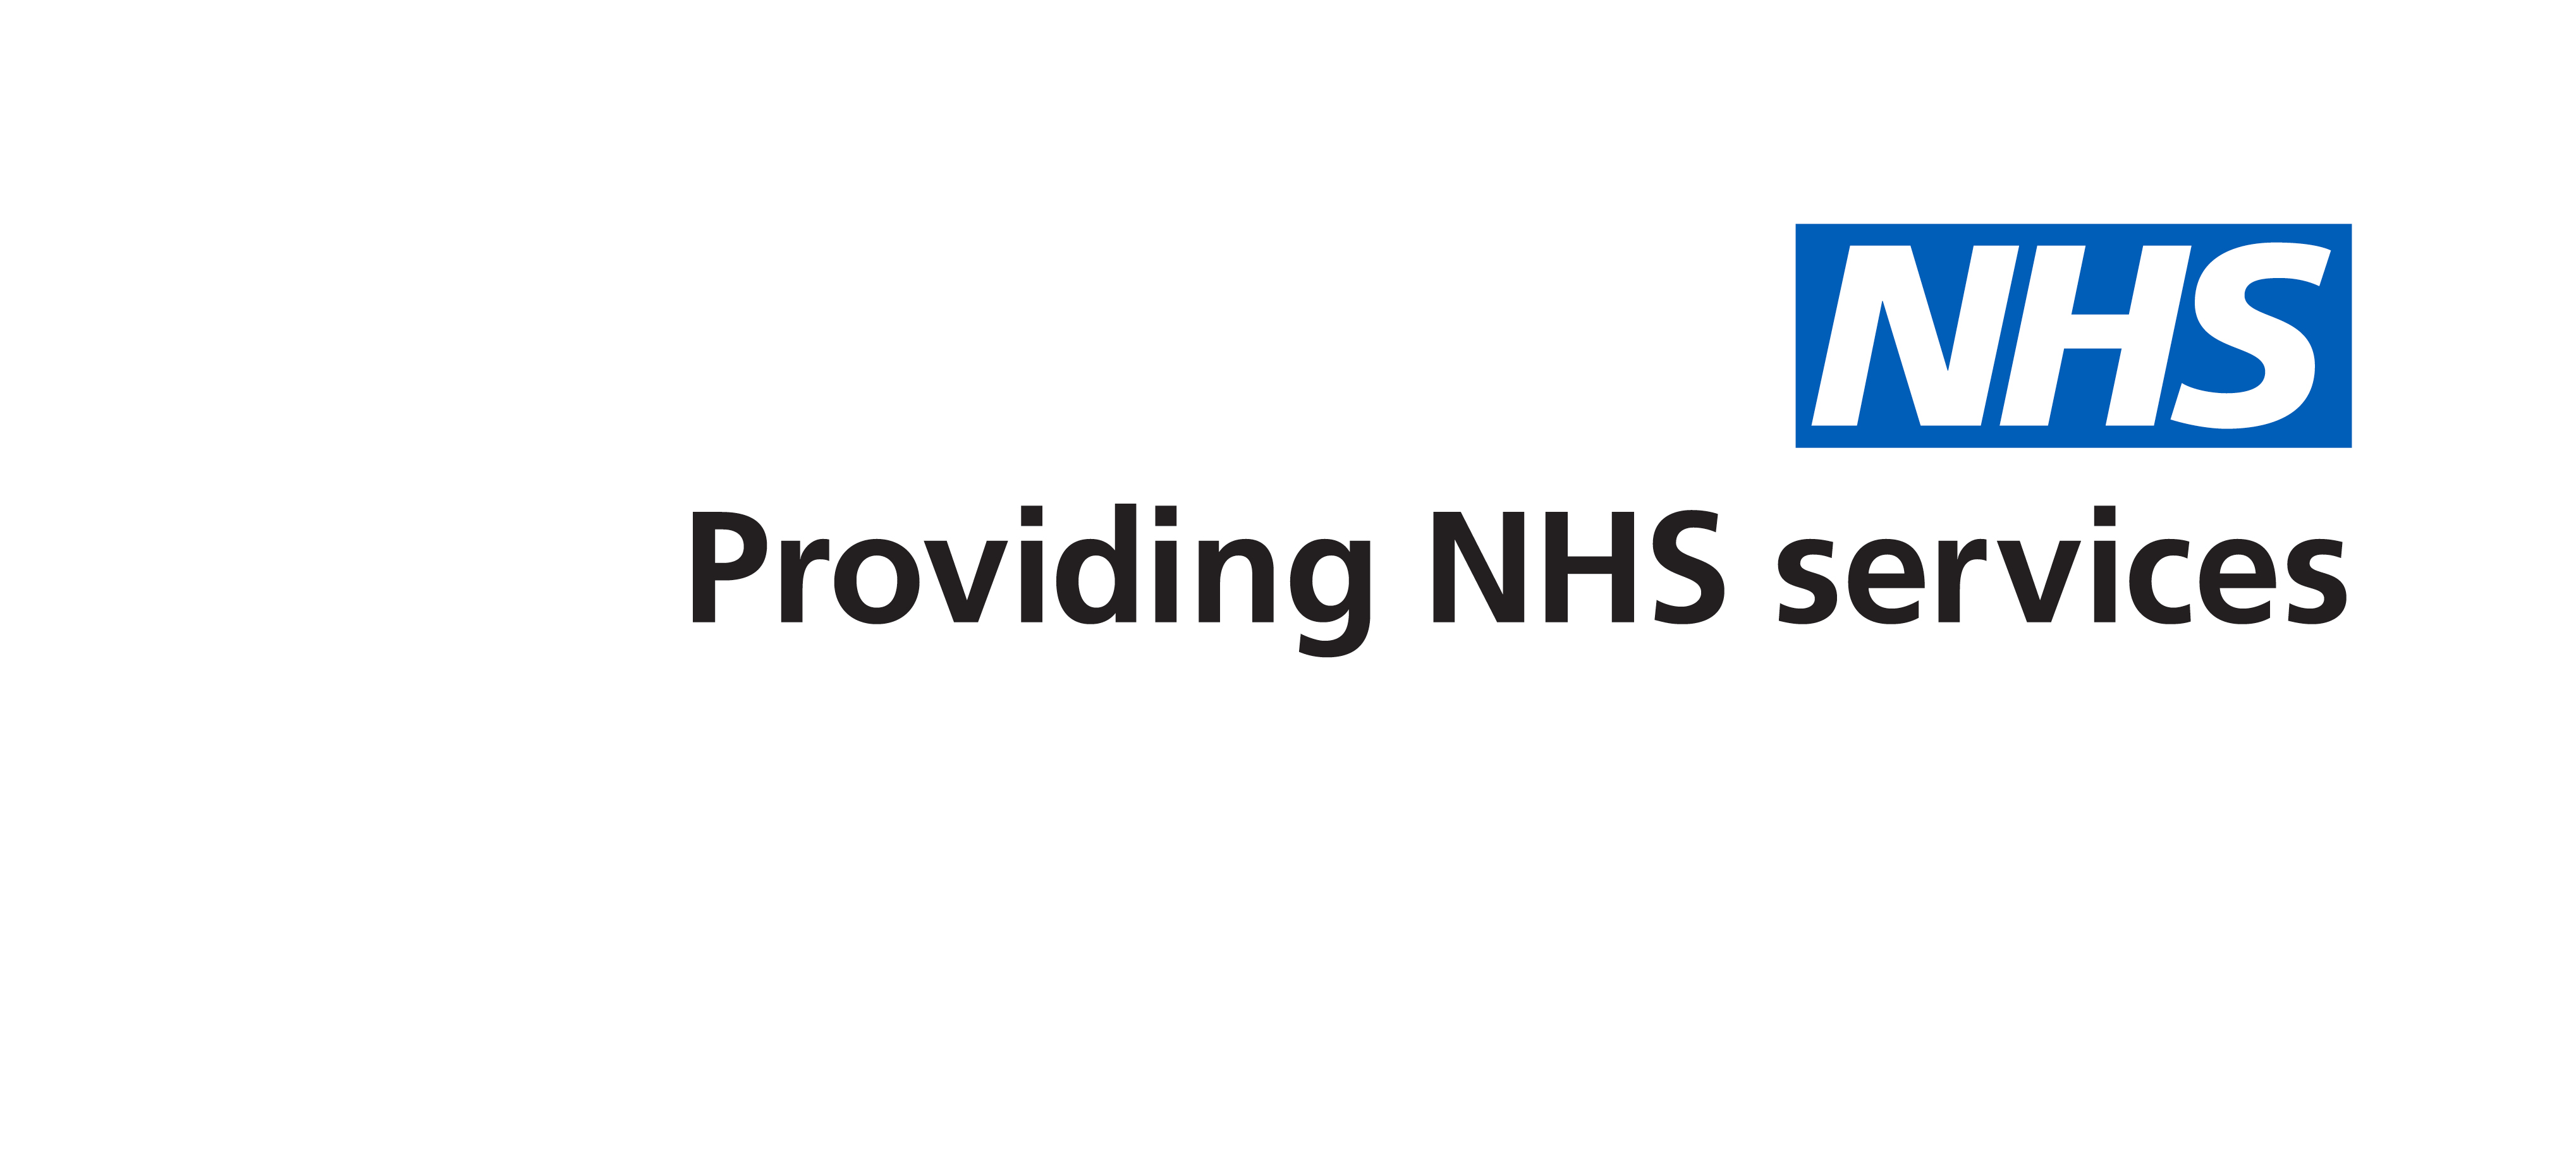 NHS Services - Primary Care